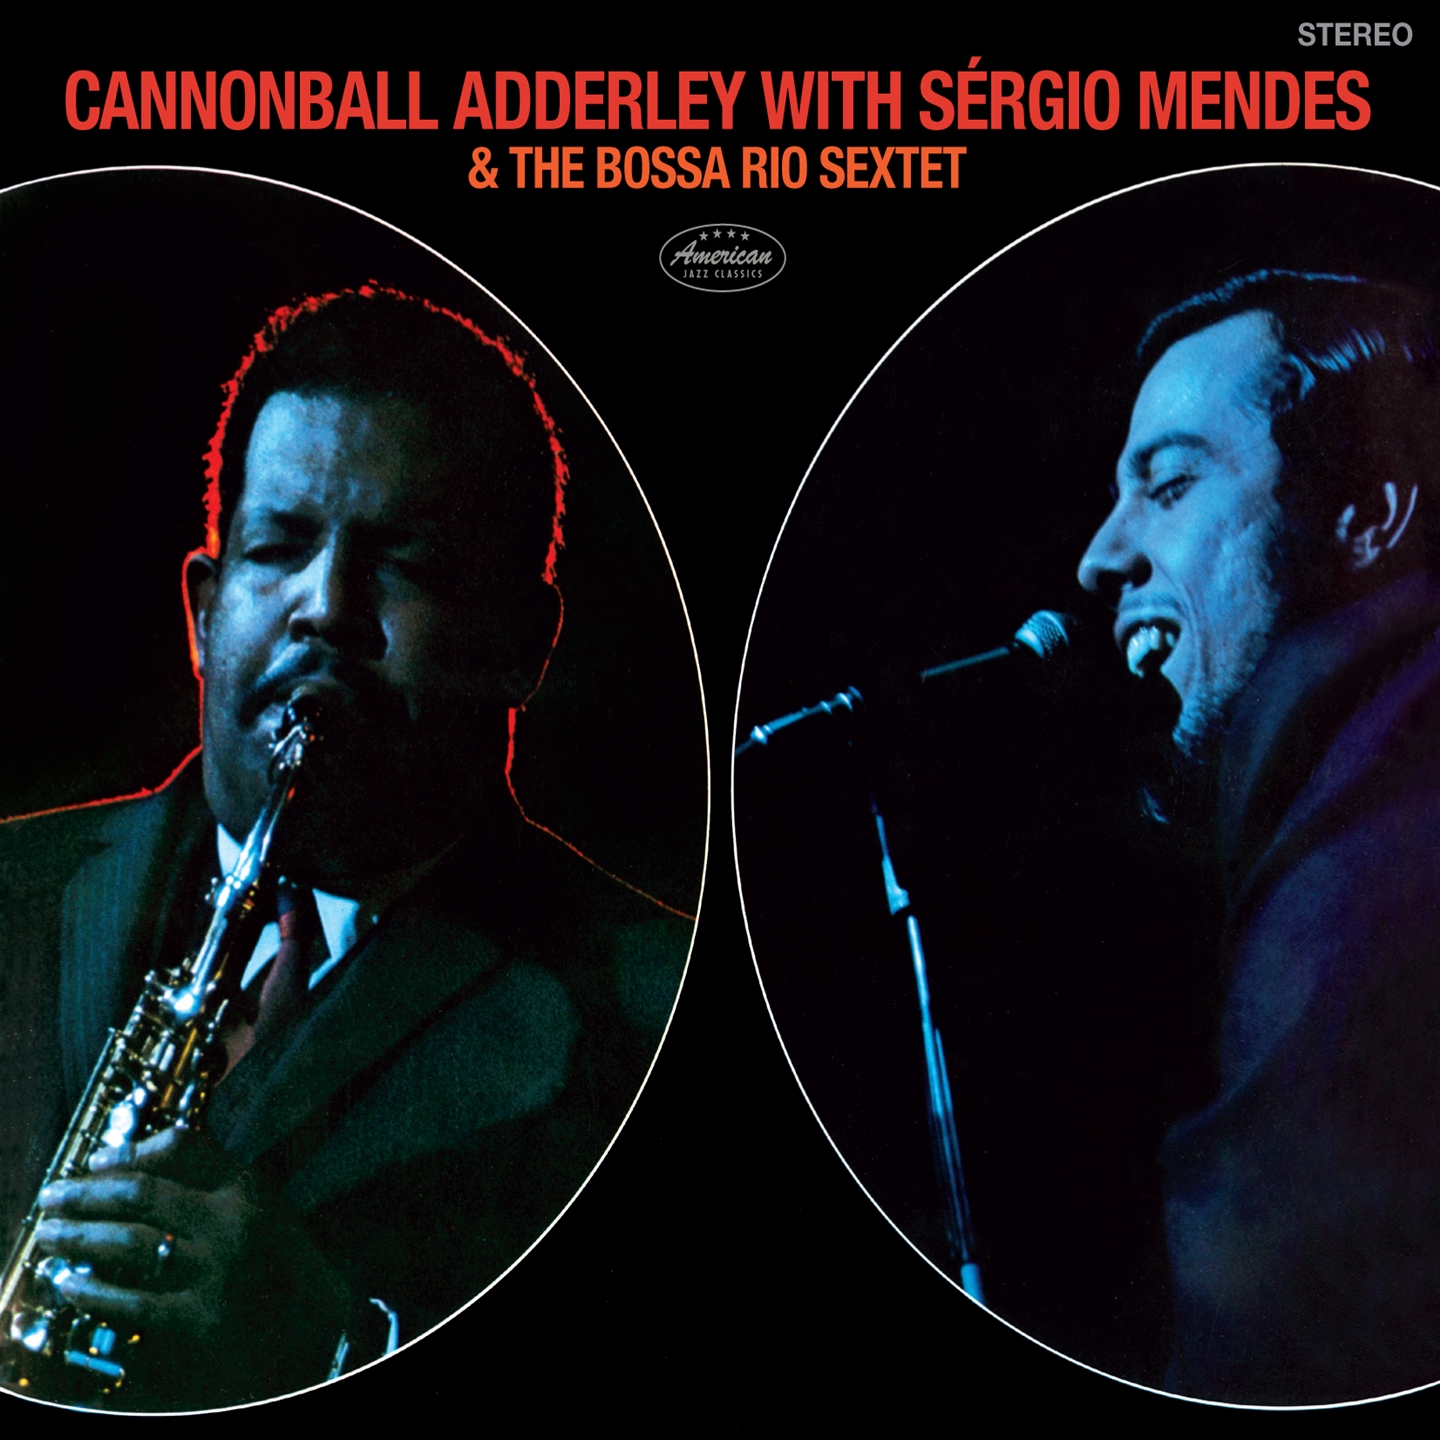 CANNONBALL ADDERLEY WITH SERGIO MENDES & THE BOSSA RIO SEXTET